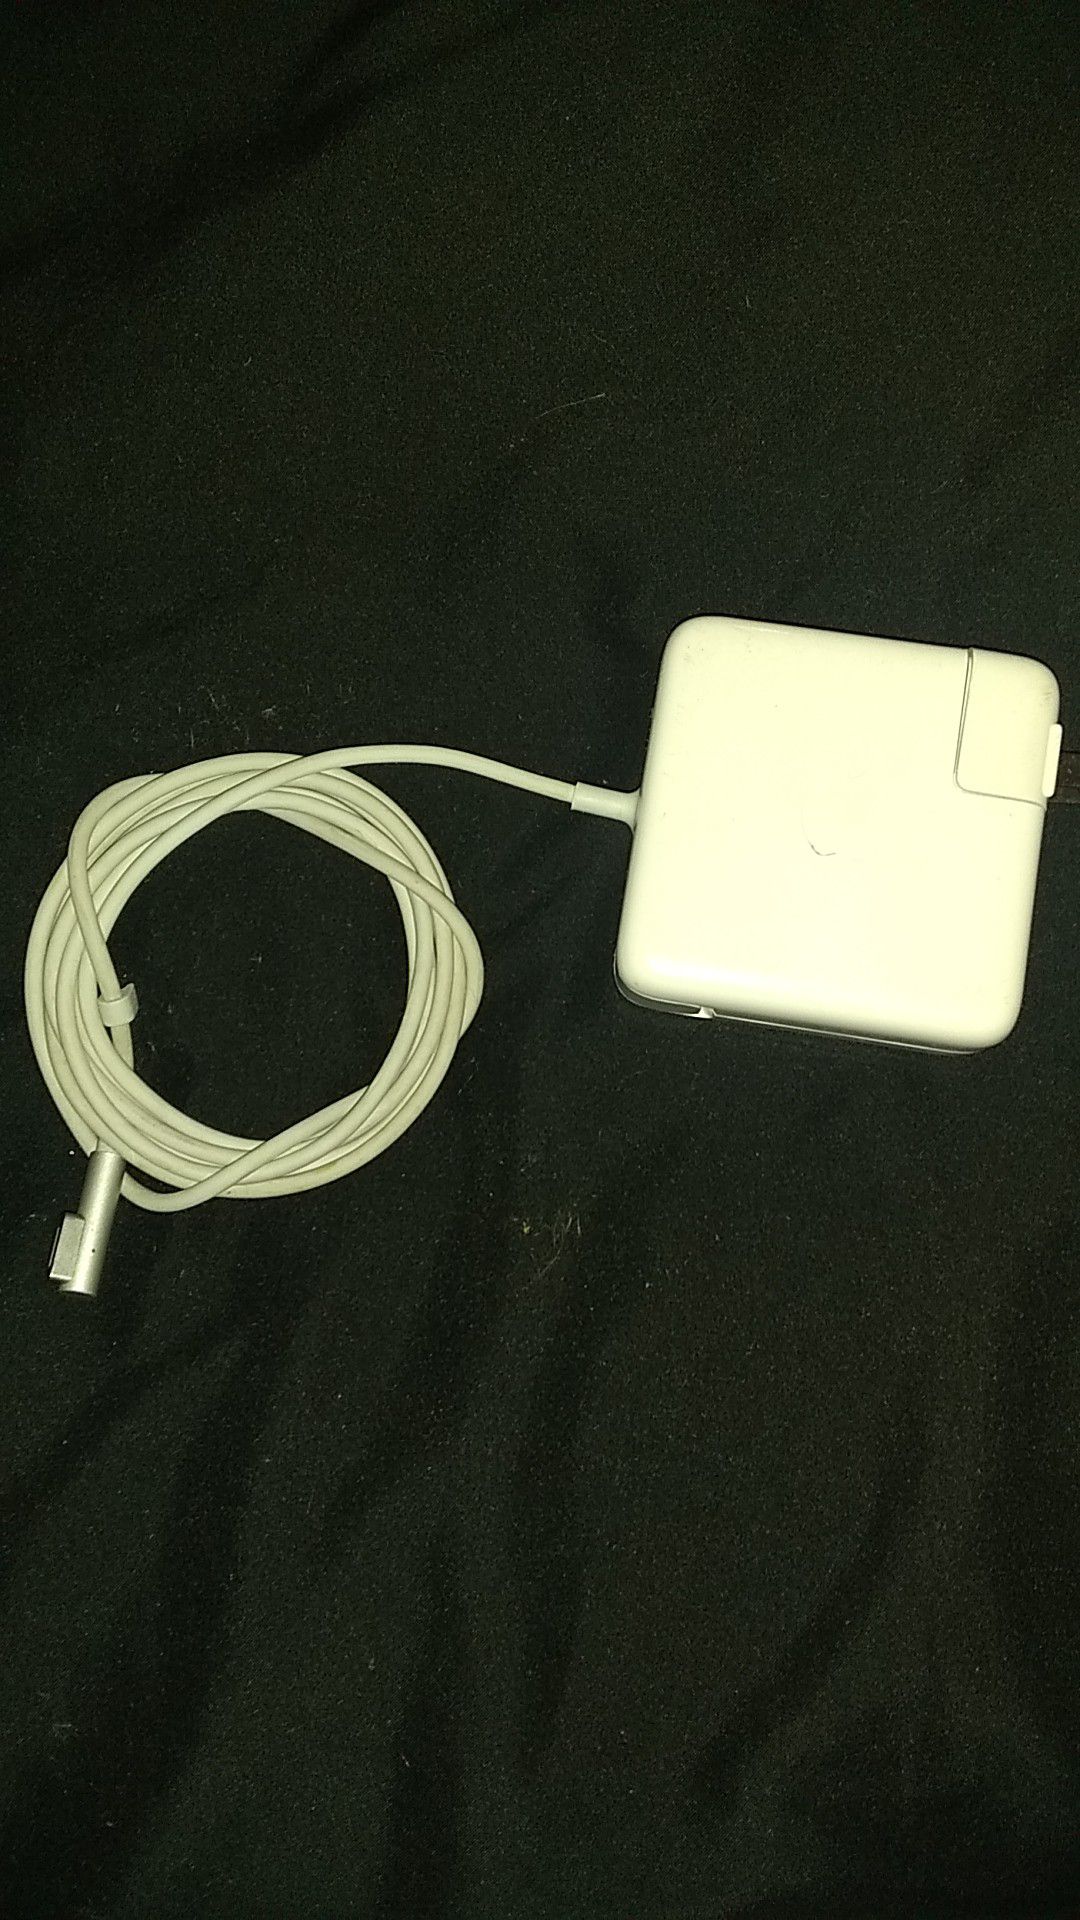 Macbook charger 100% works see photos